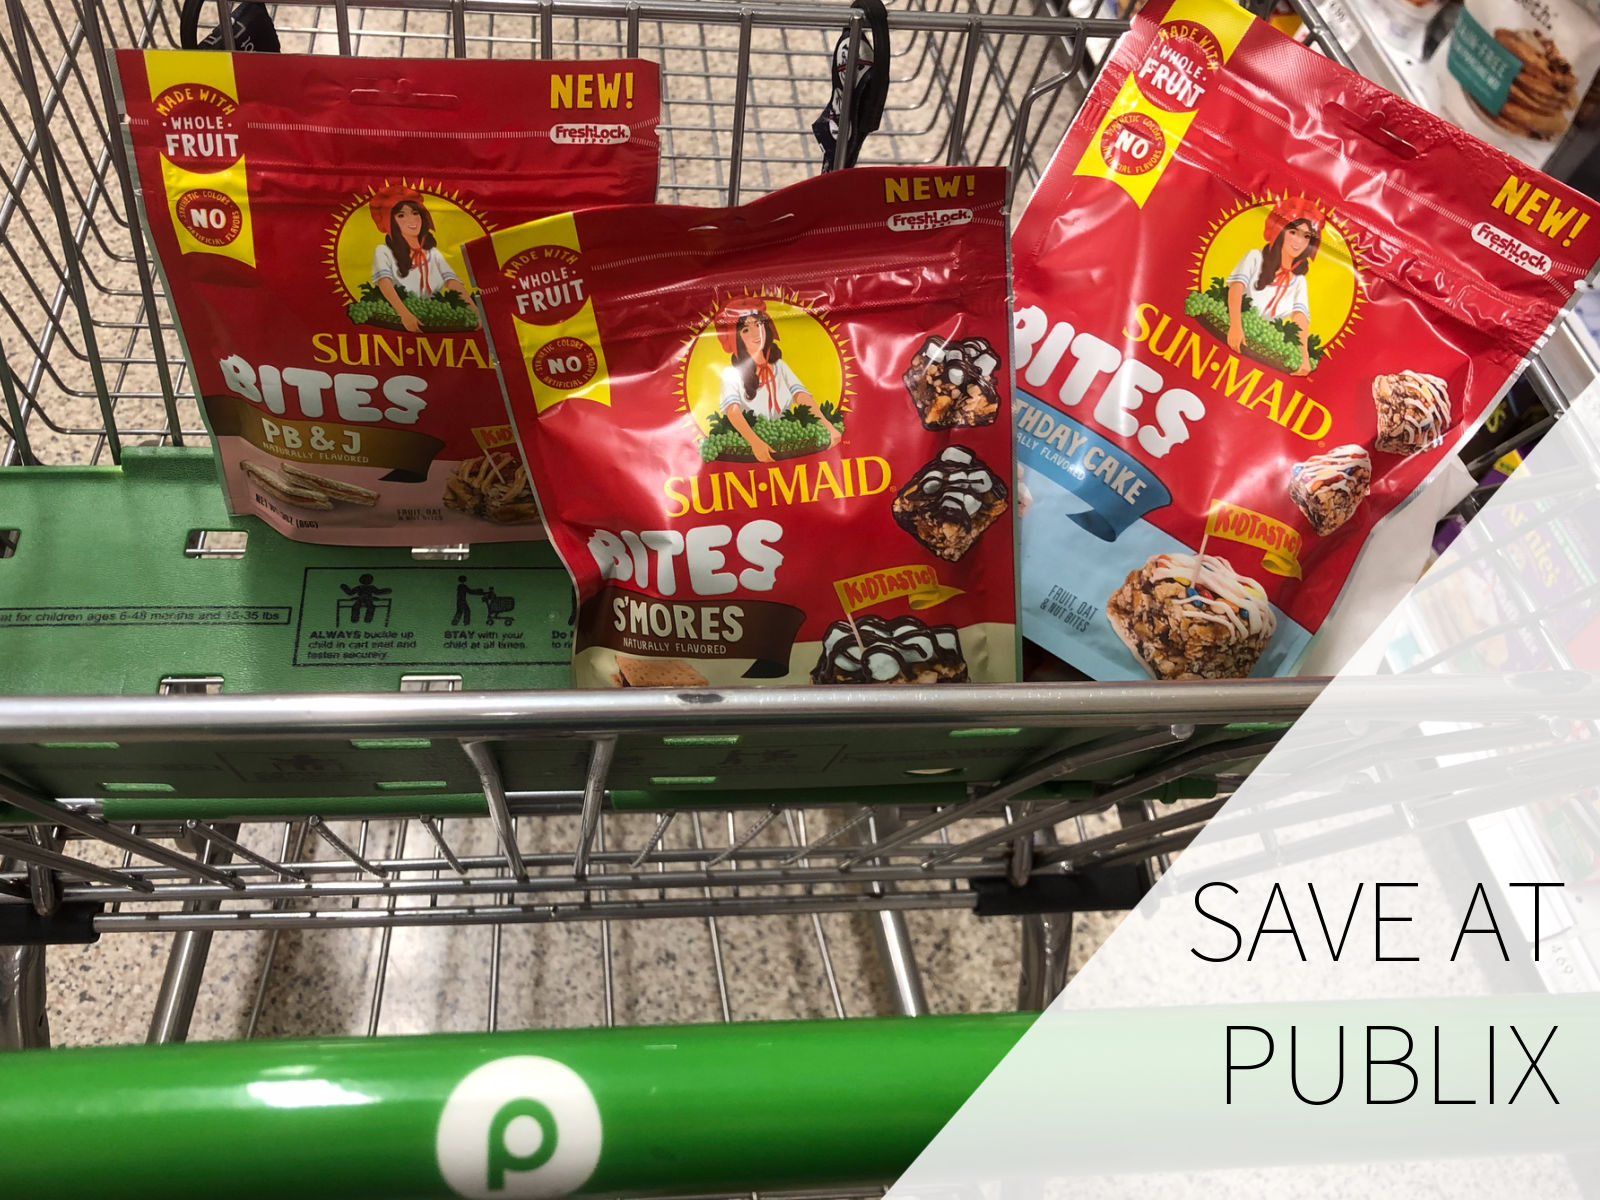 Don’t Miss Your Chance To Grab Sun-Maid Bites While They Are BOGO At Publix